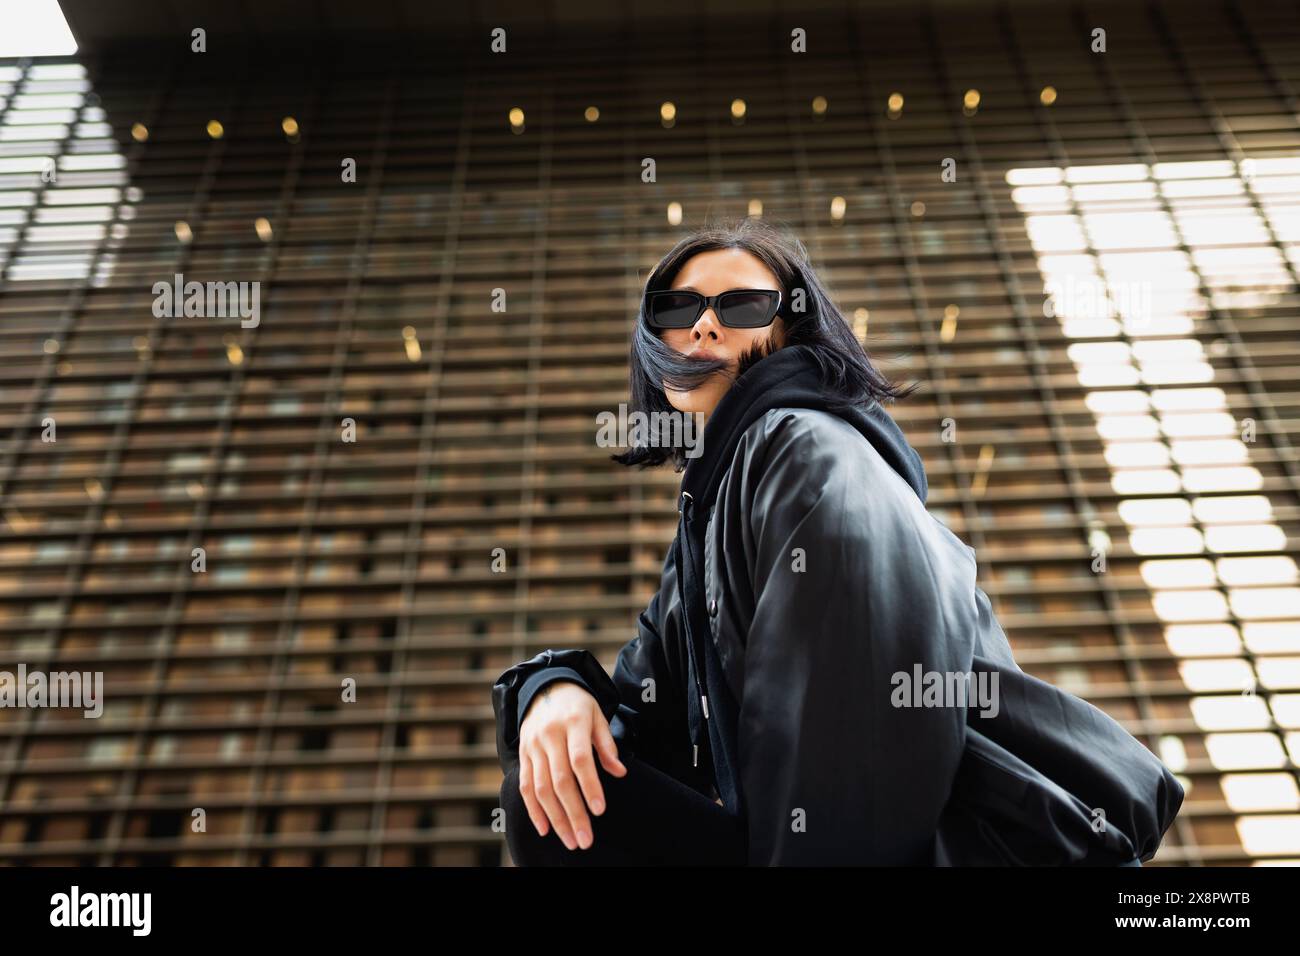 Young woman wearing sunglasses and a black hoodie is crouched down, looking confidently at the camera with a modern urban building in the backgr Stock Photo